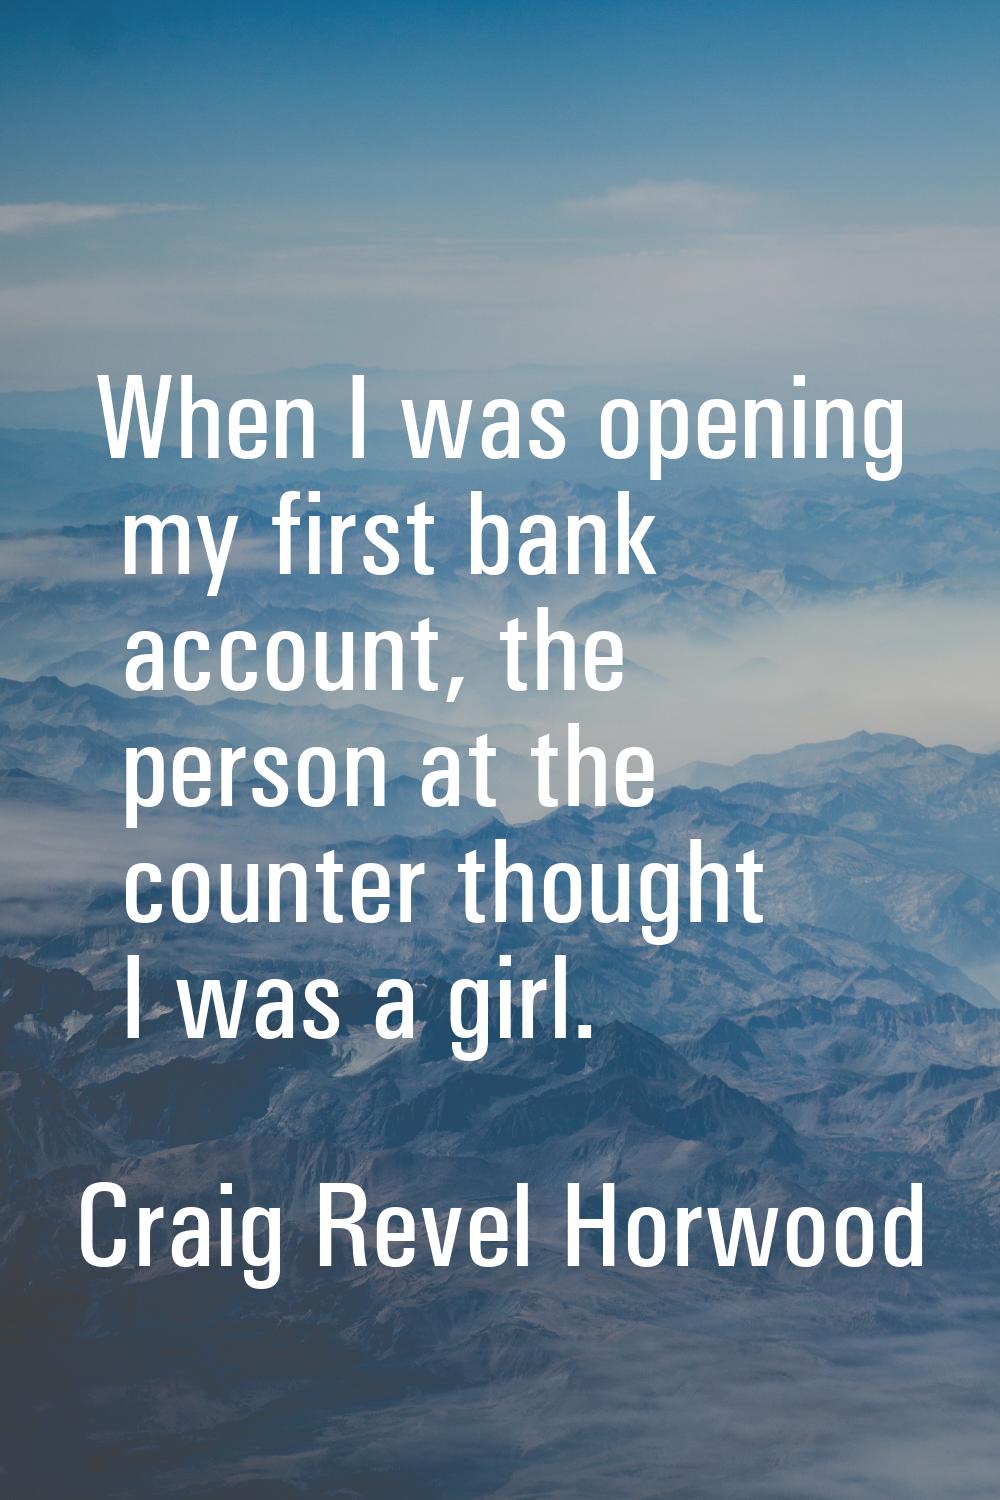 When I was opening my first bank account, the person at the counter thought I was a girl.